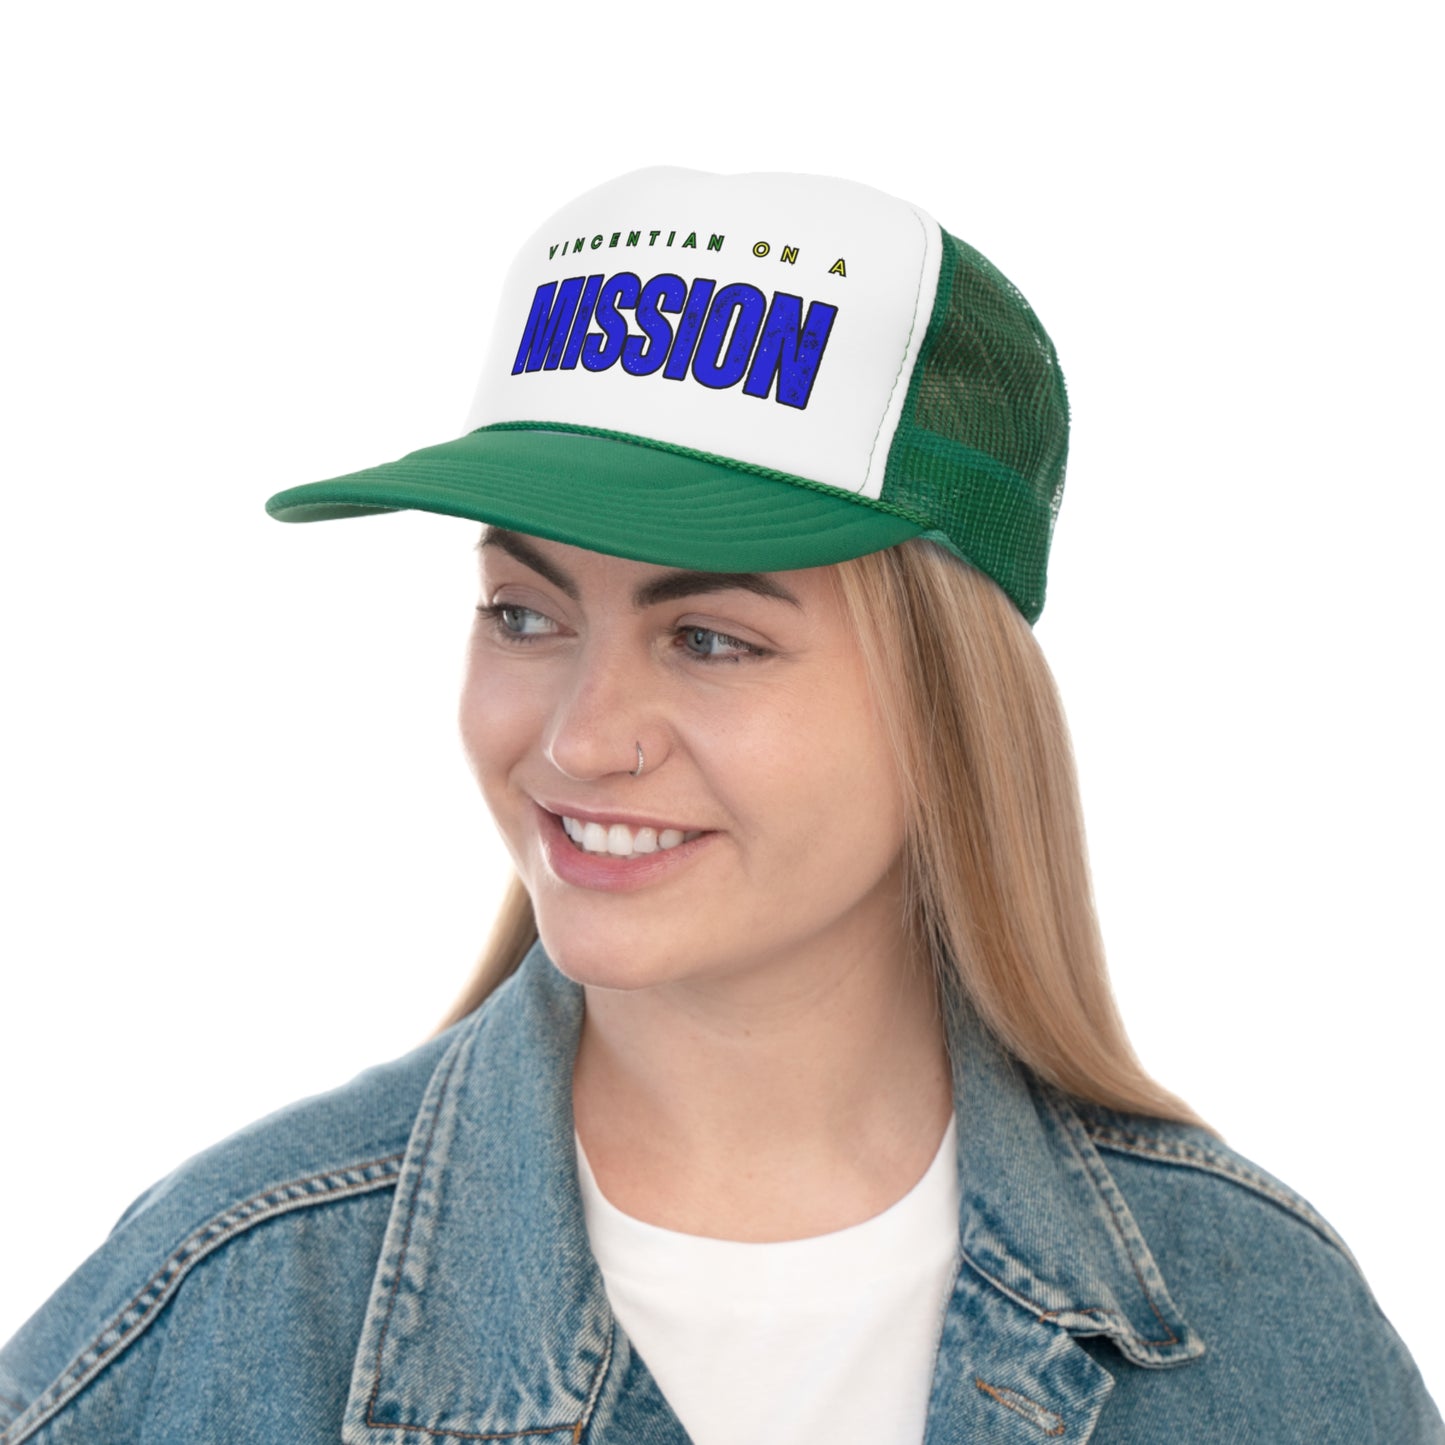 Vincentian on a Mission Trucker Caps